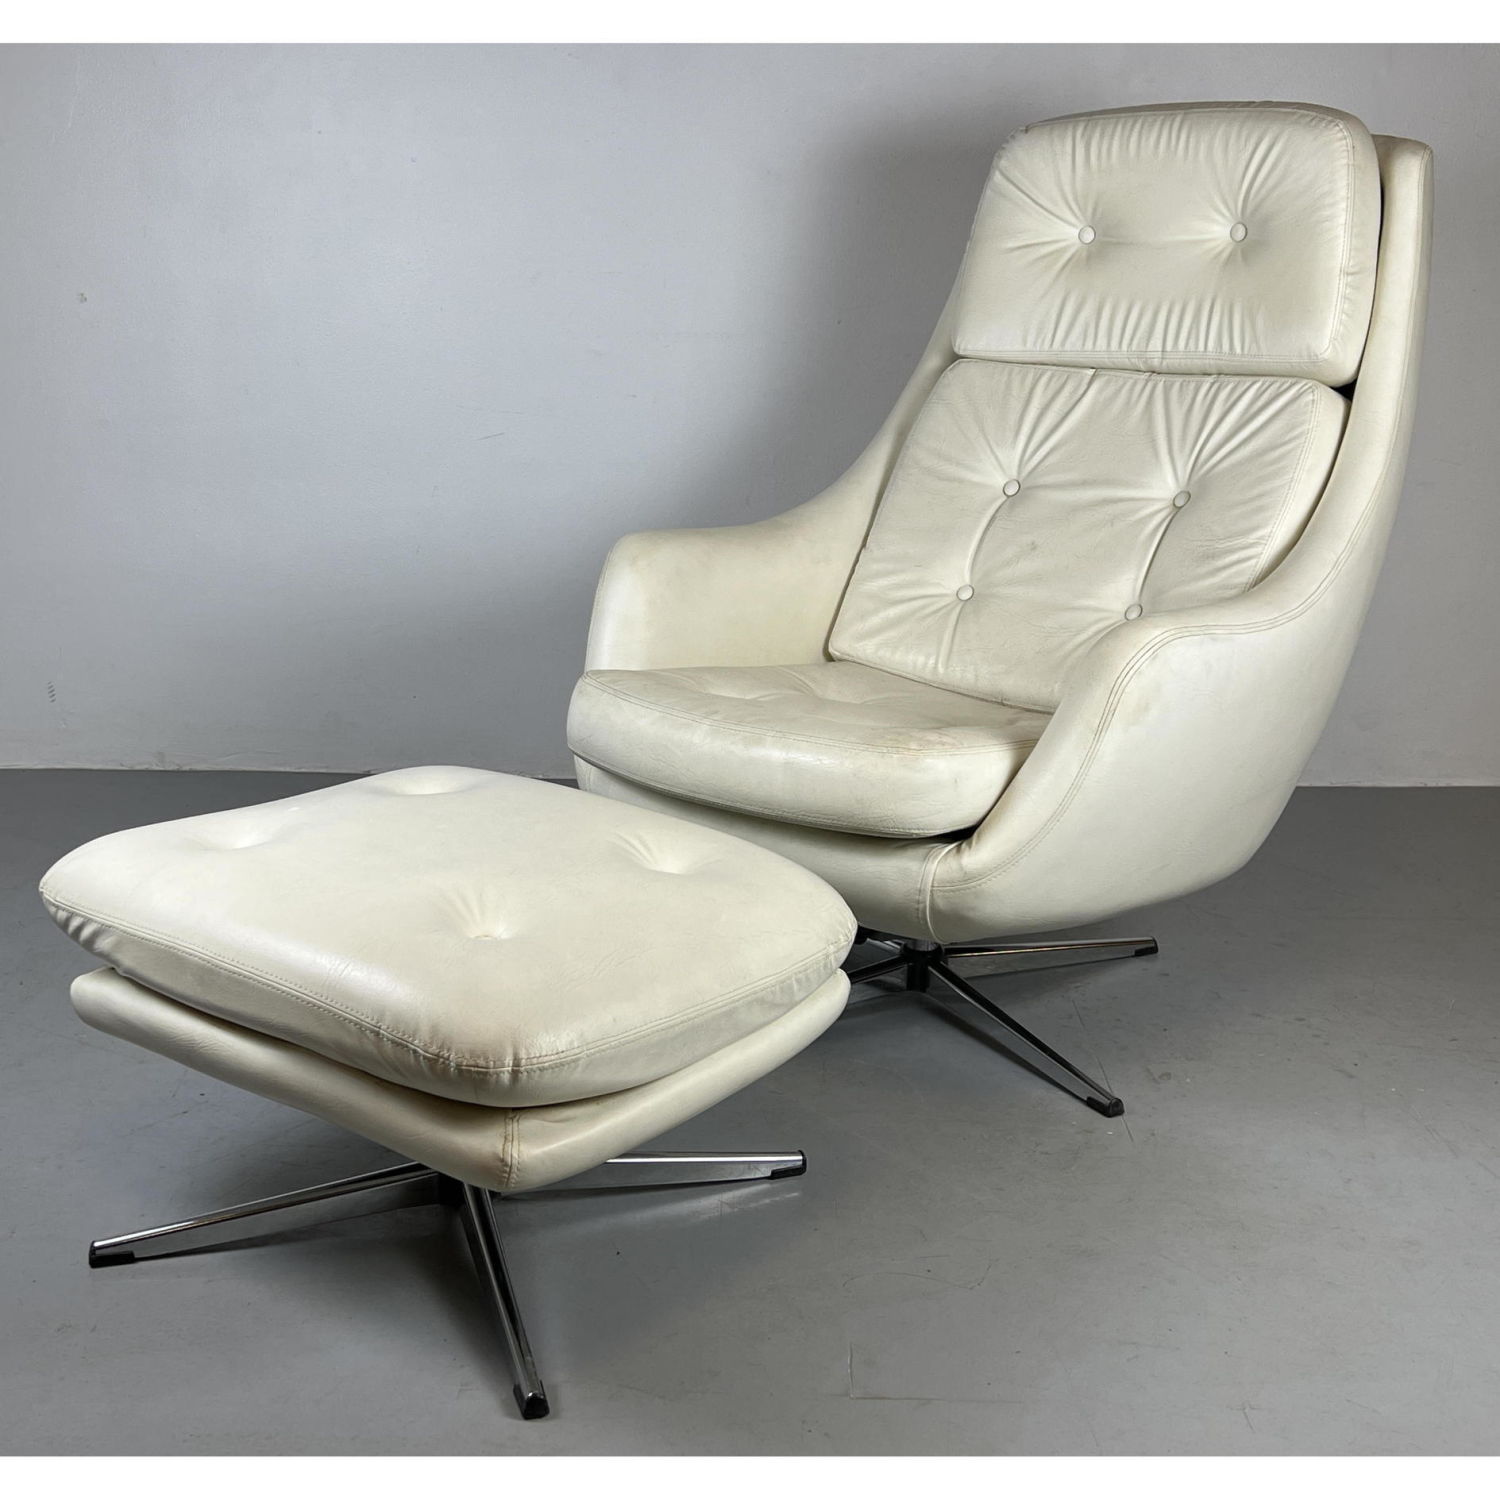 Overman of Sweden Lounge chair